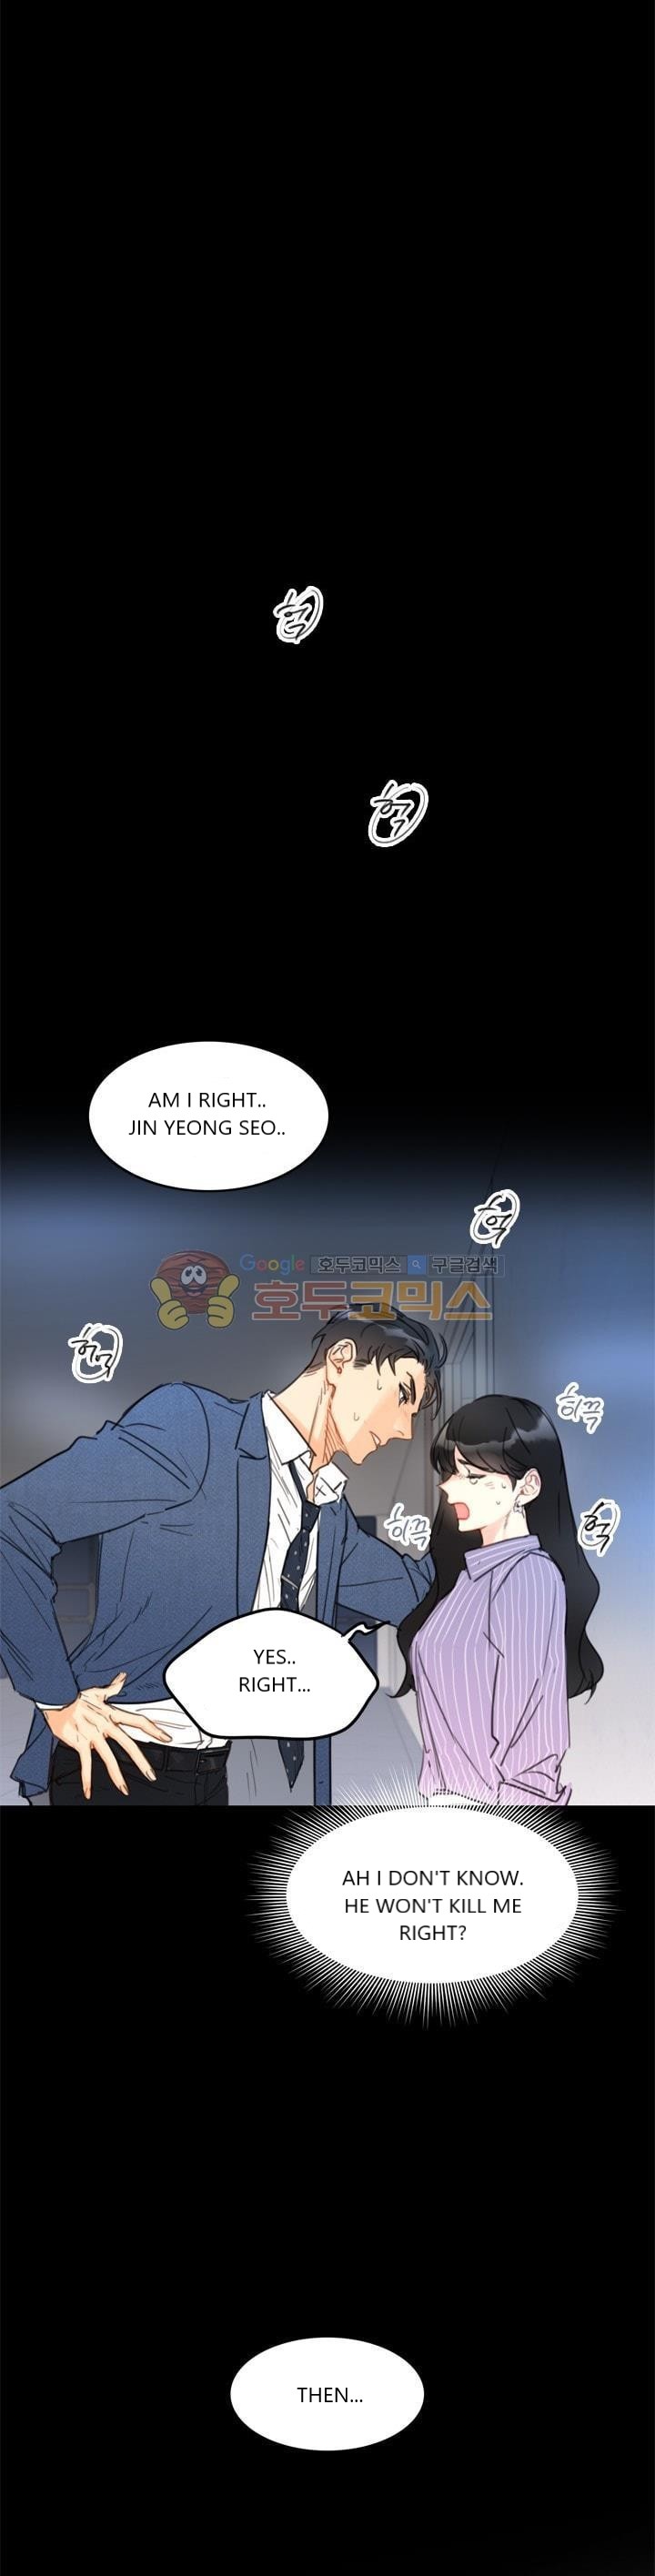 The office blind date manhwa